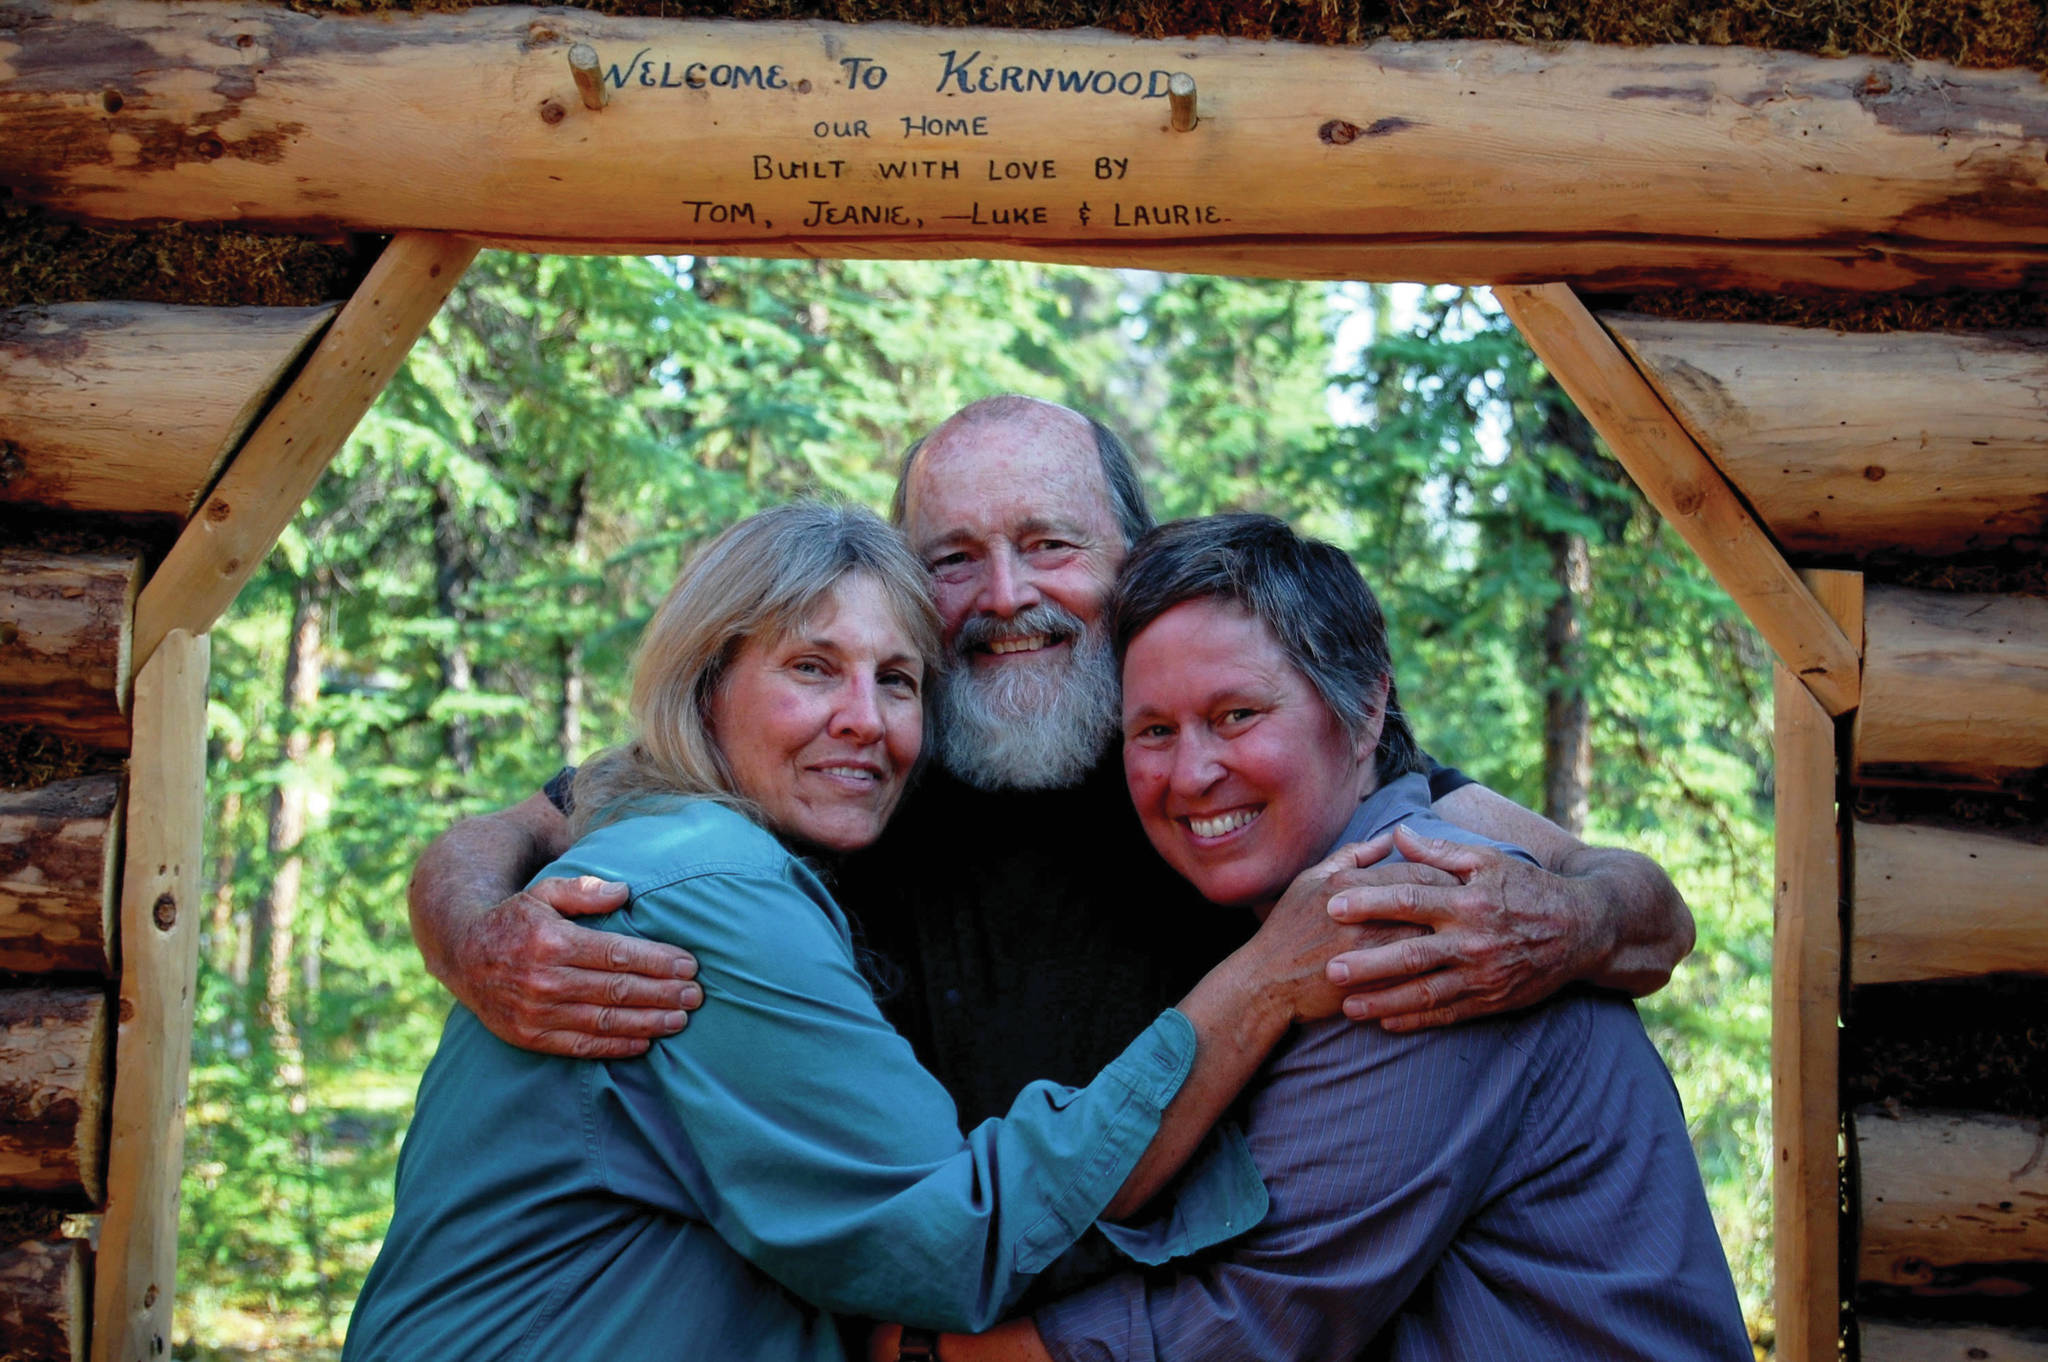 Jean Aspen, Tom Irons and Laurie Schacht in a still photo from the movie “ReWilding Kernwood,” filmed from 2016 to 2018 on the Chandalar River in the Brooks Range, Alaska. (Photo courtesy of Jean Aspen)